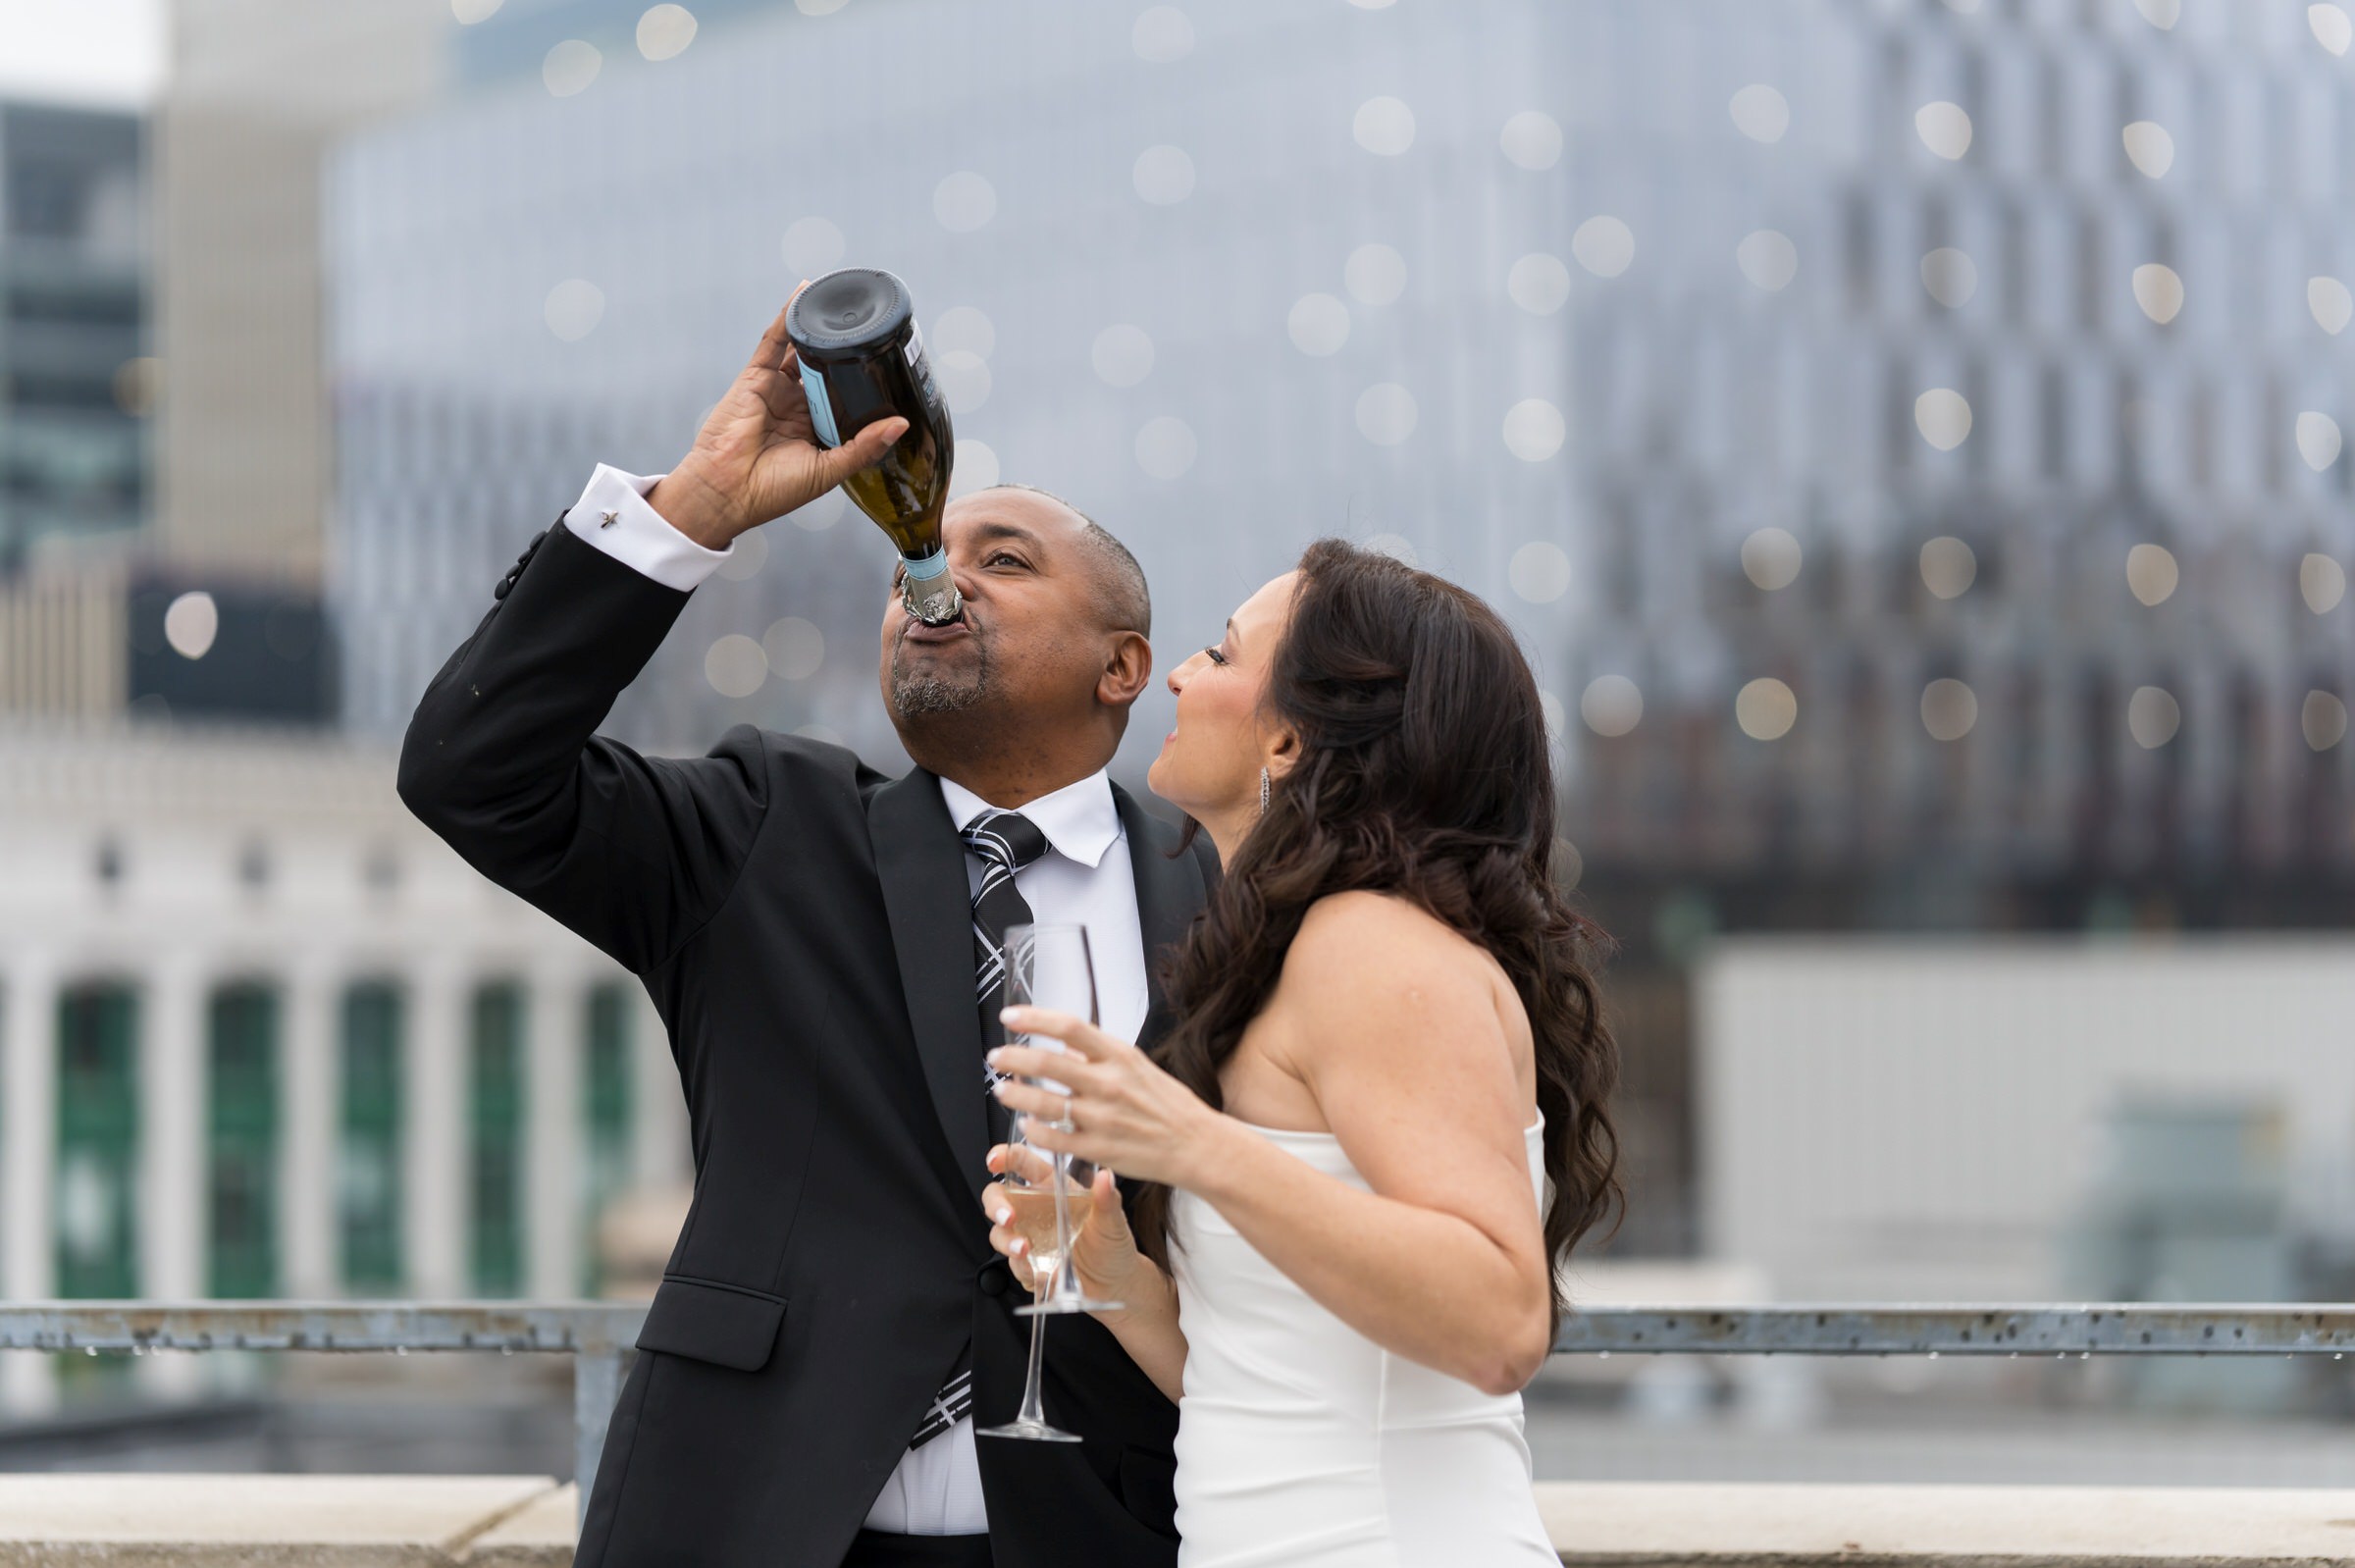 A groom chugs champagne out of the bottle on their wedding day.  